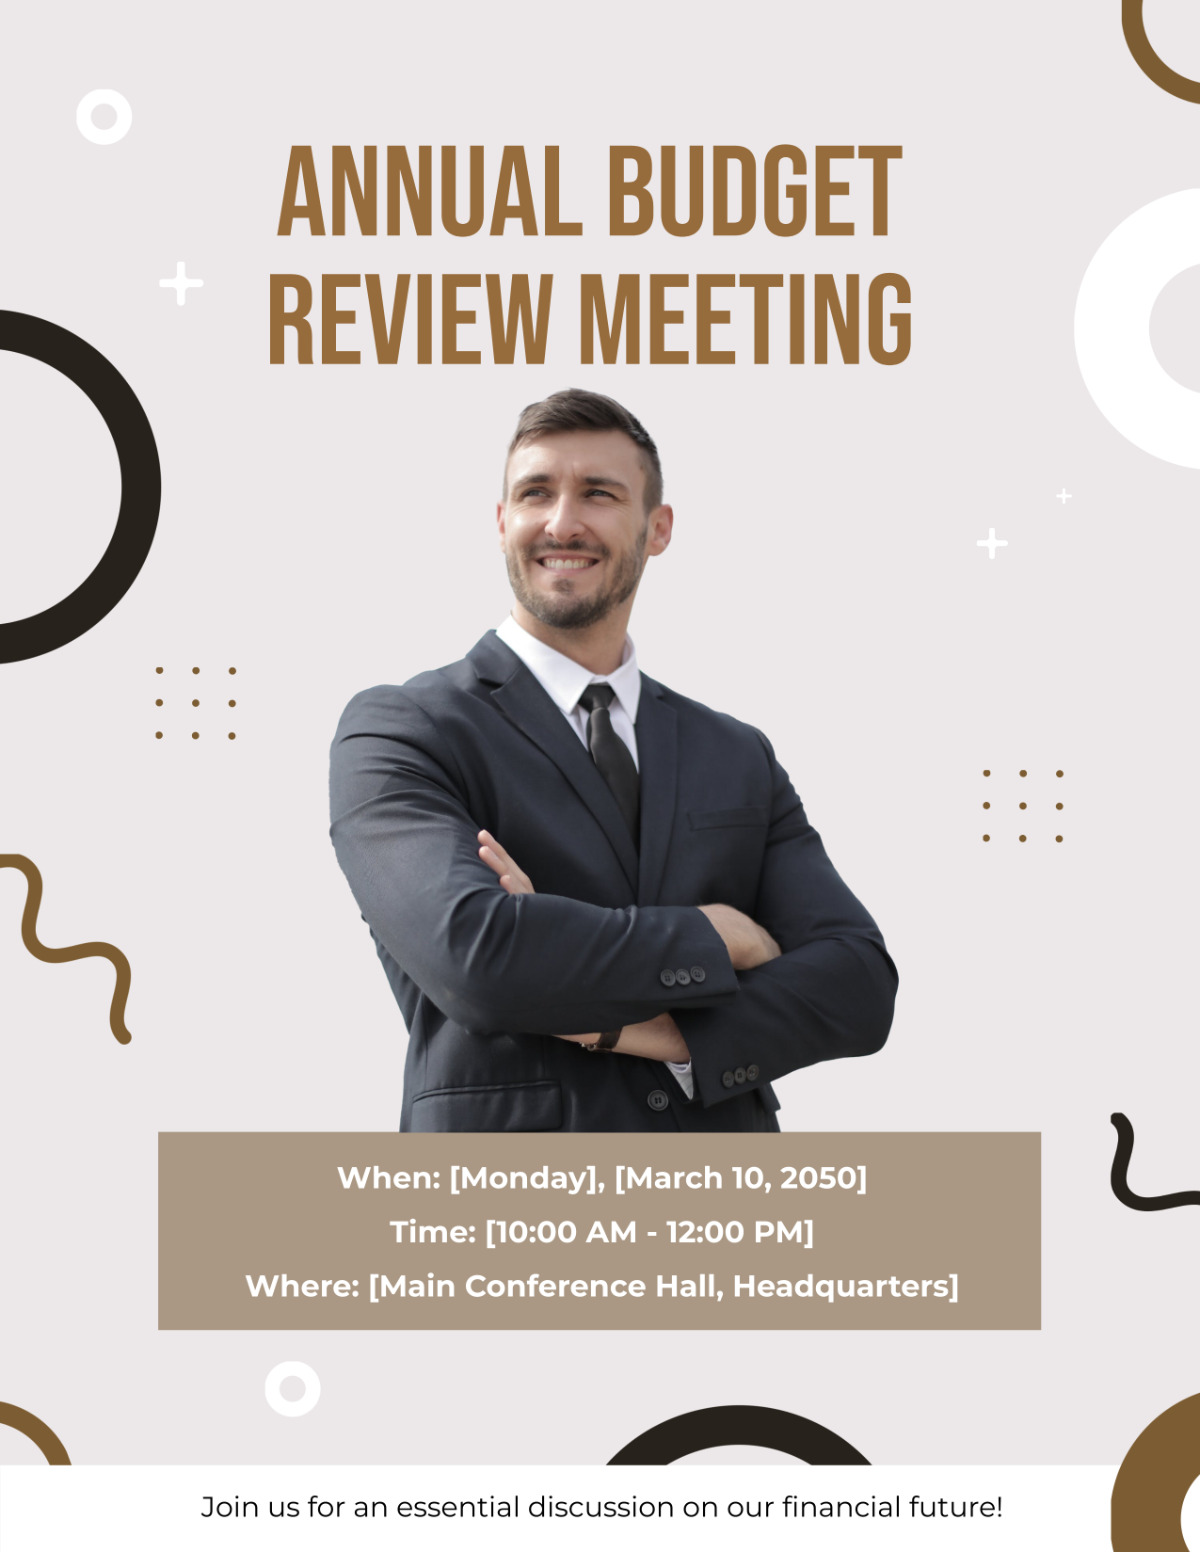 Annual Budget Review Meeting Flyer